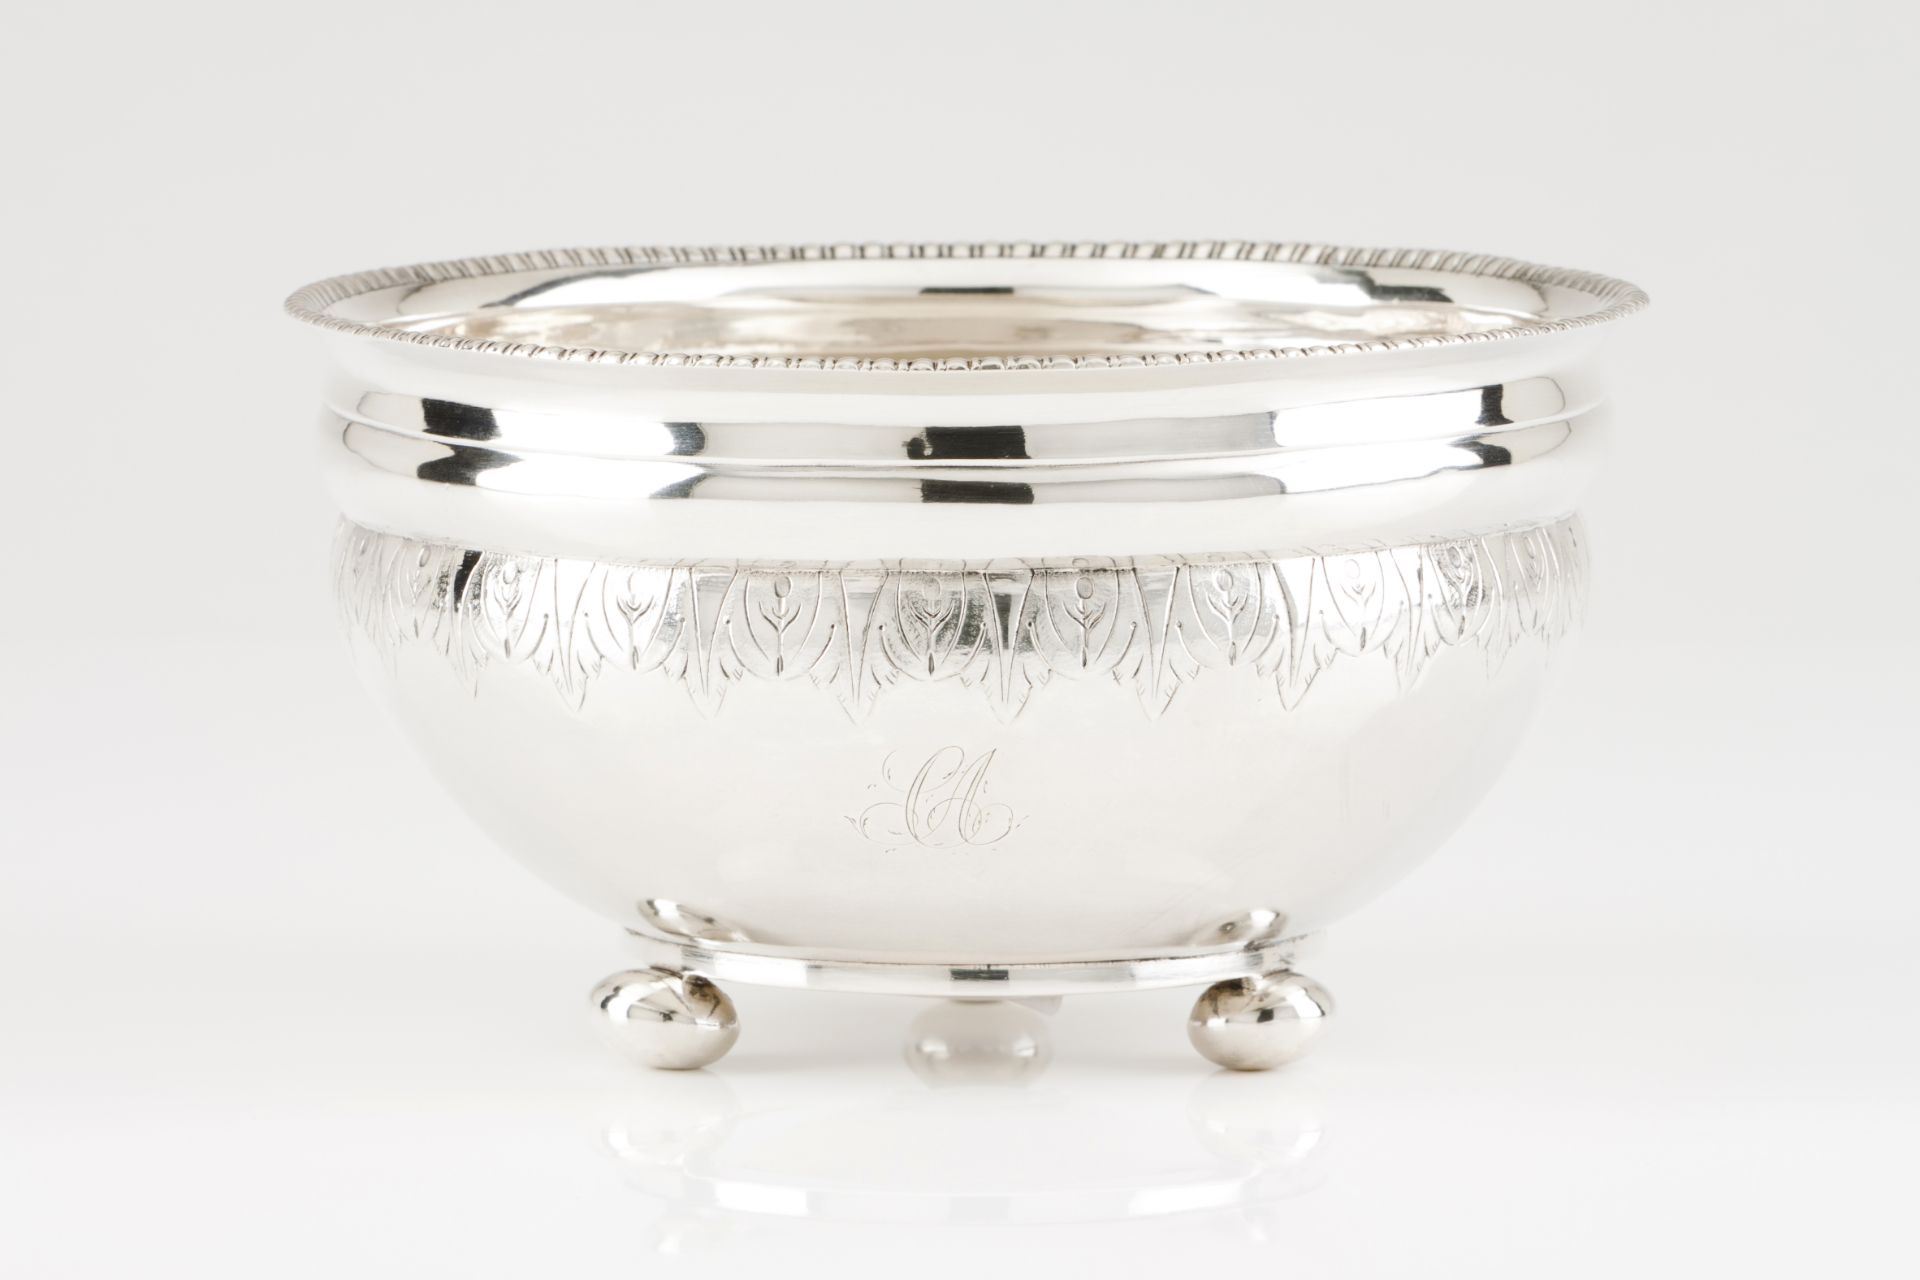 A drip bowlPortuguese silver, 19th centuryPlain turned body of engraved foliage band and gadrooned